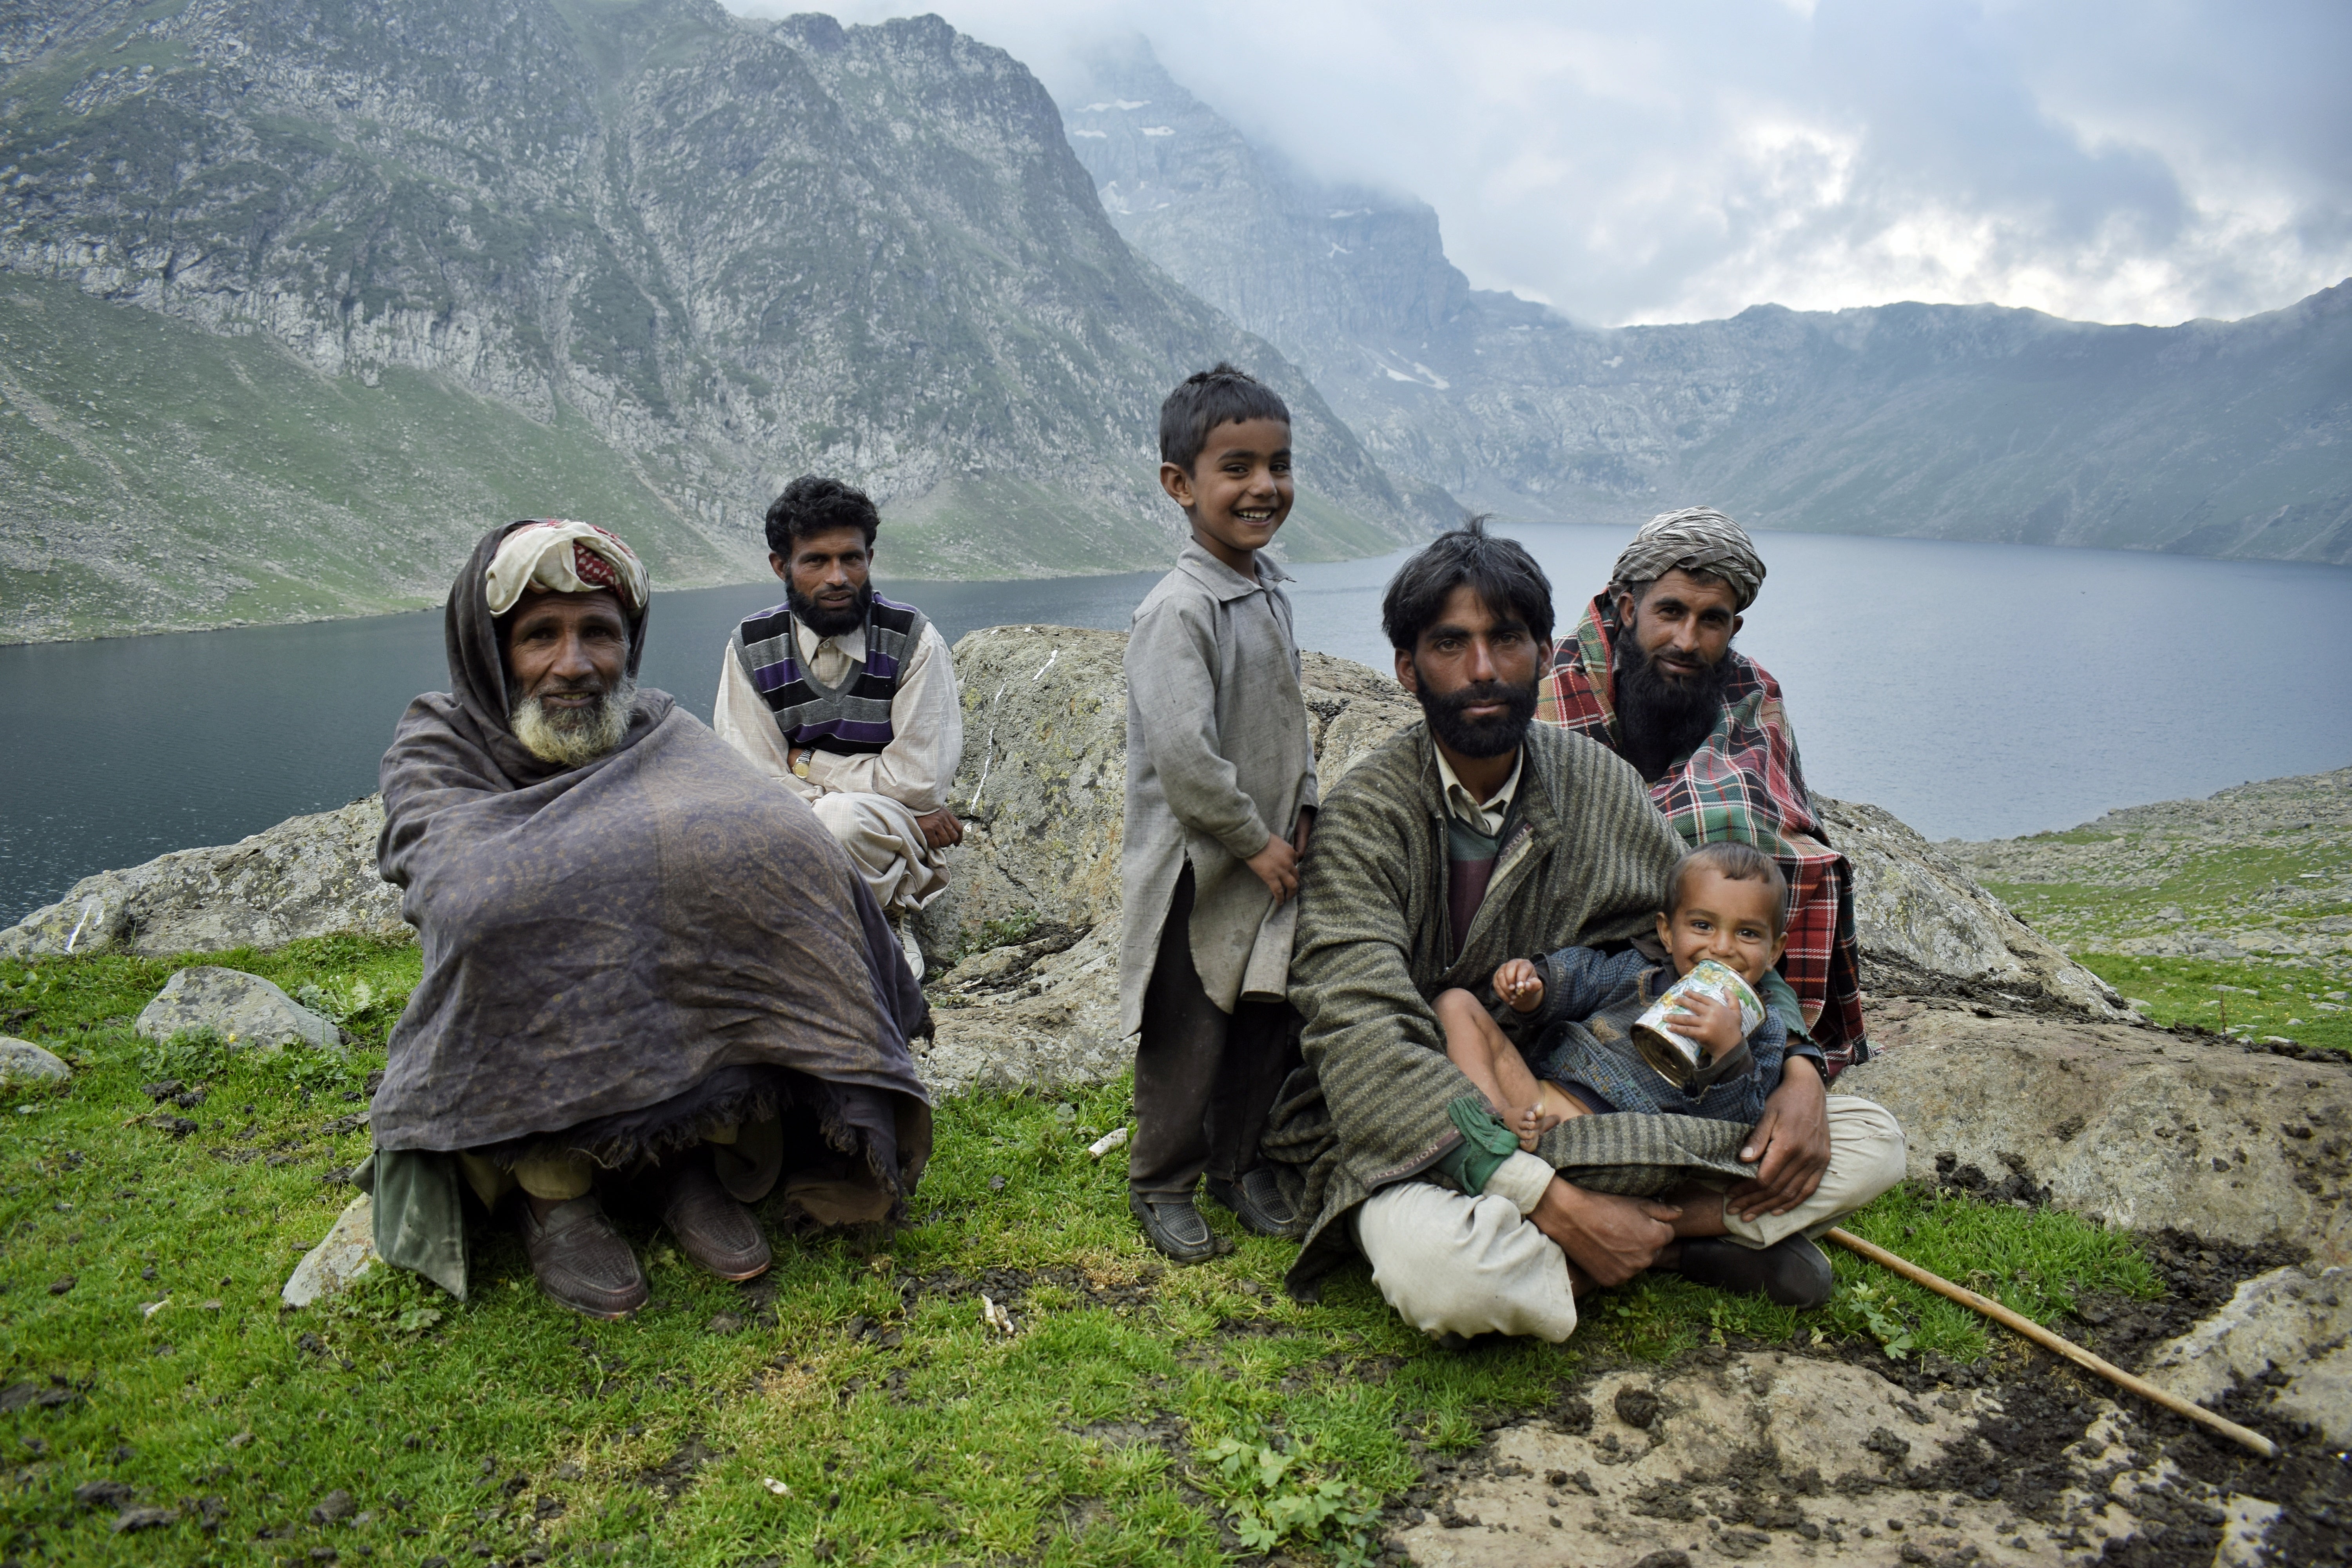 A nomadic pastoralist family near Tarsar Lake. This area is of very great significance for them as it is known for its lush-green meadows